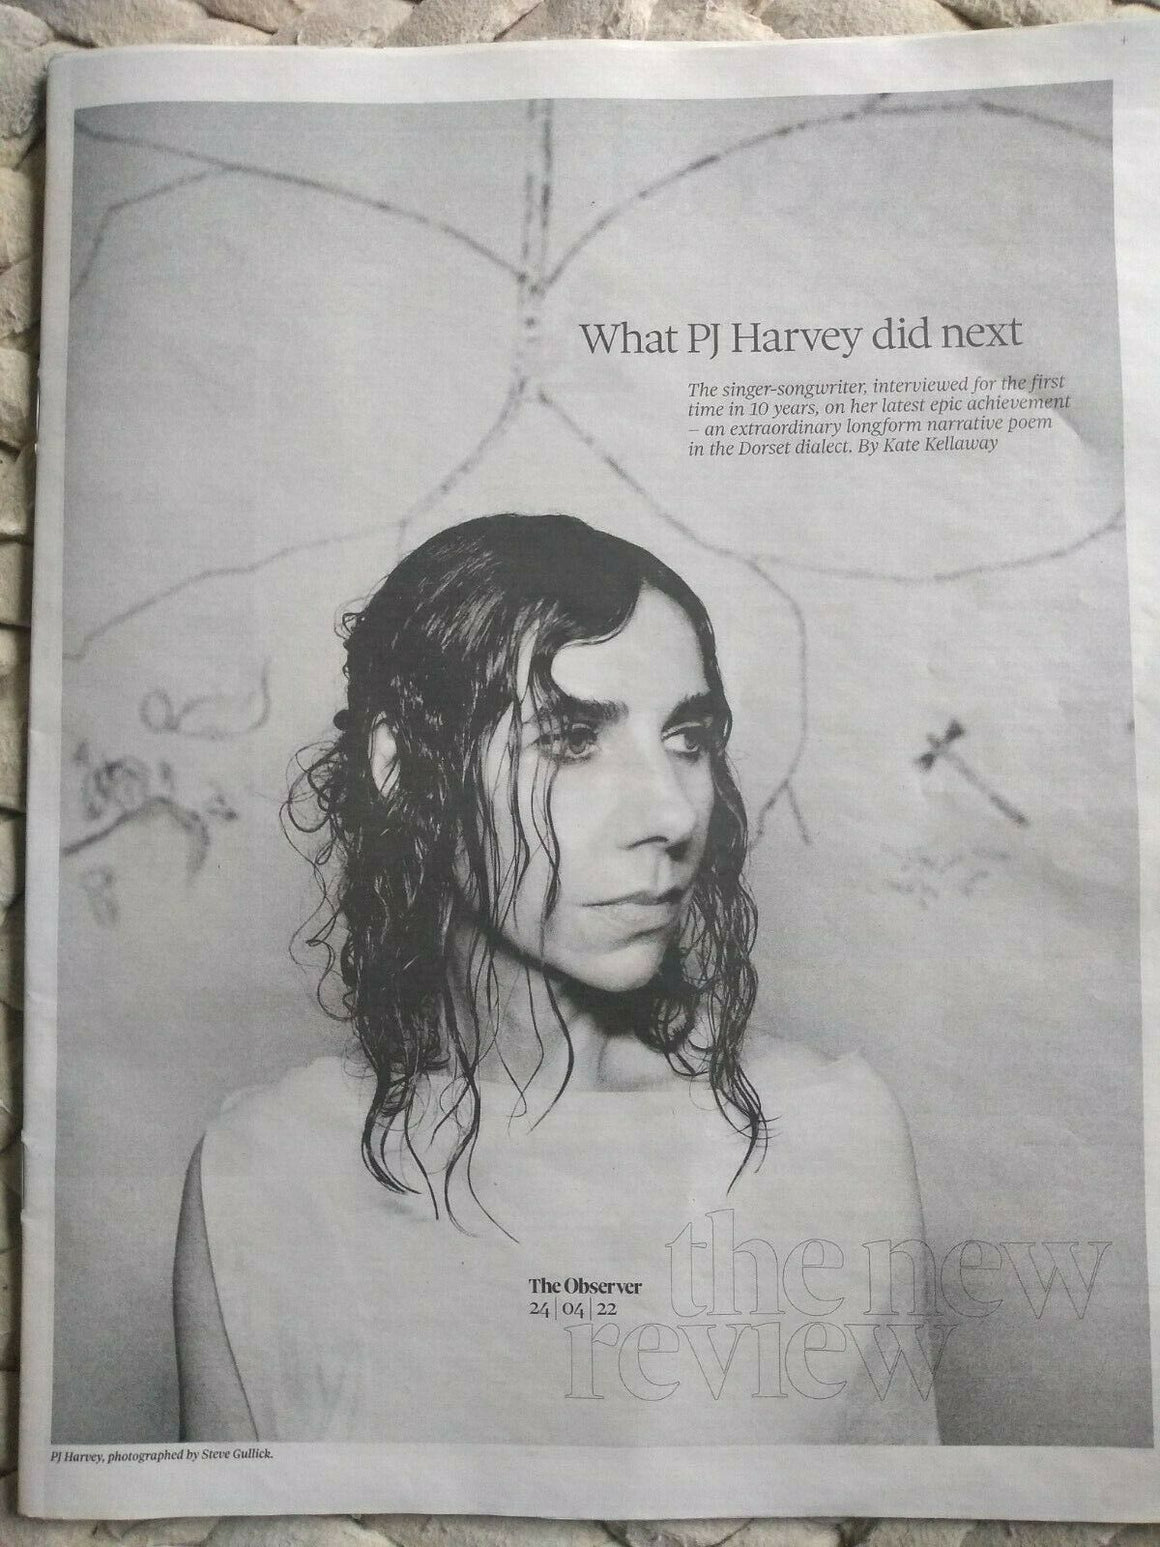 OBSERVER REVIEW 24/04/2022 PJ HARVEY COVER INTERVIEW